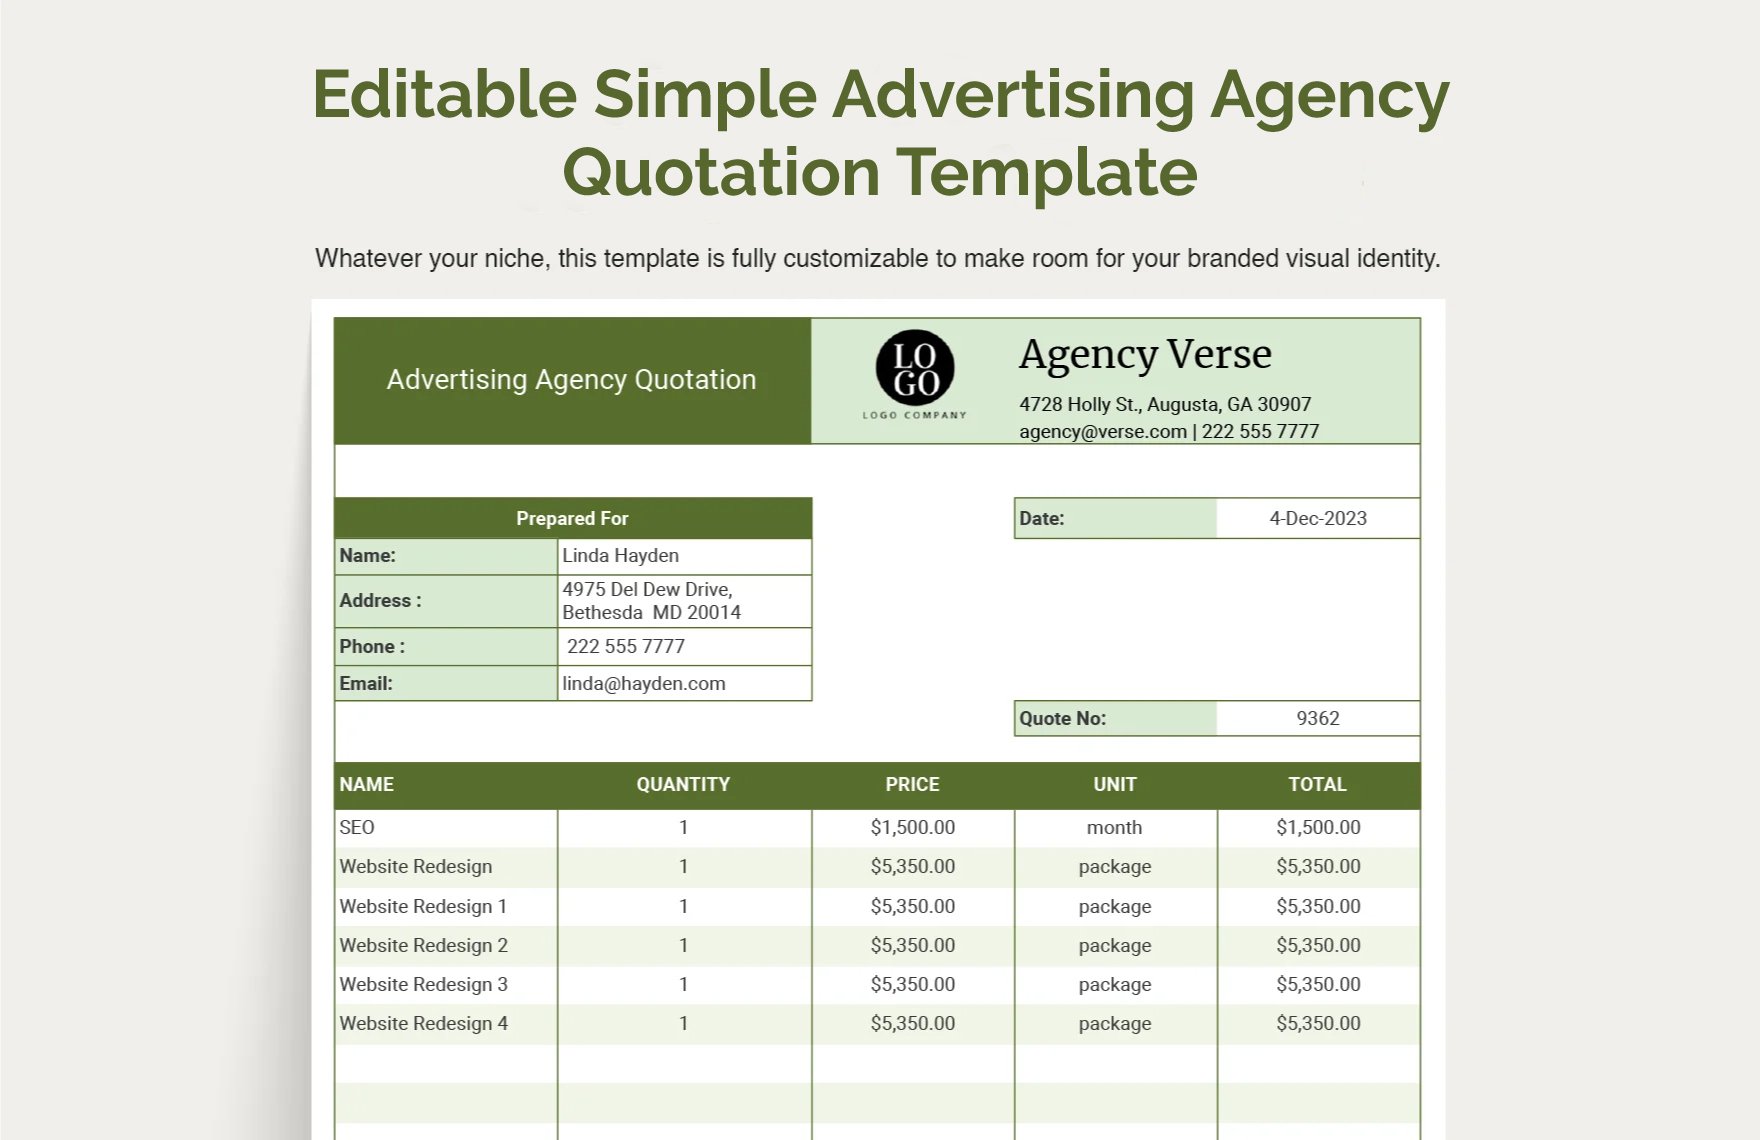 Free Editable Simple Advertising Agency Quotation Template